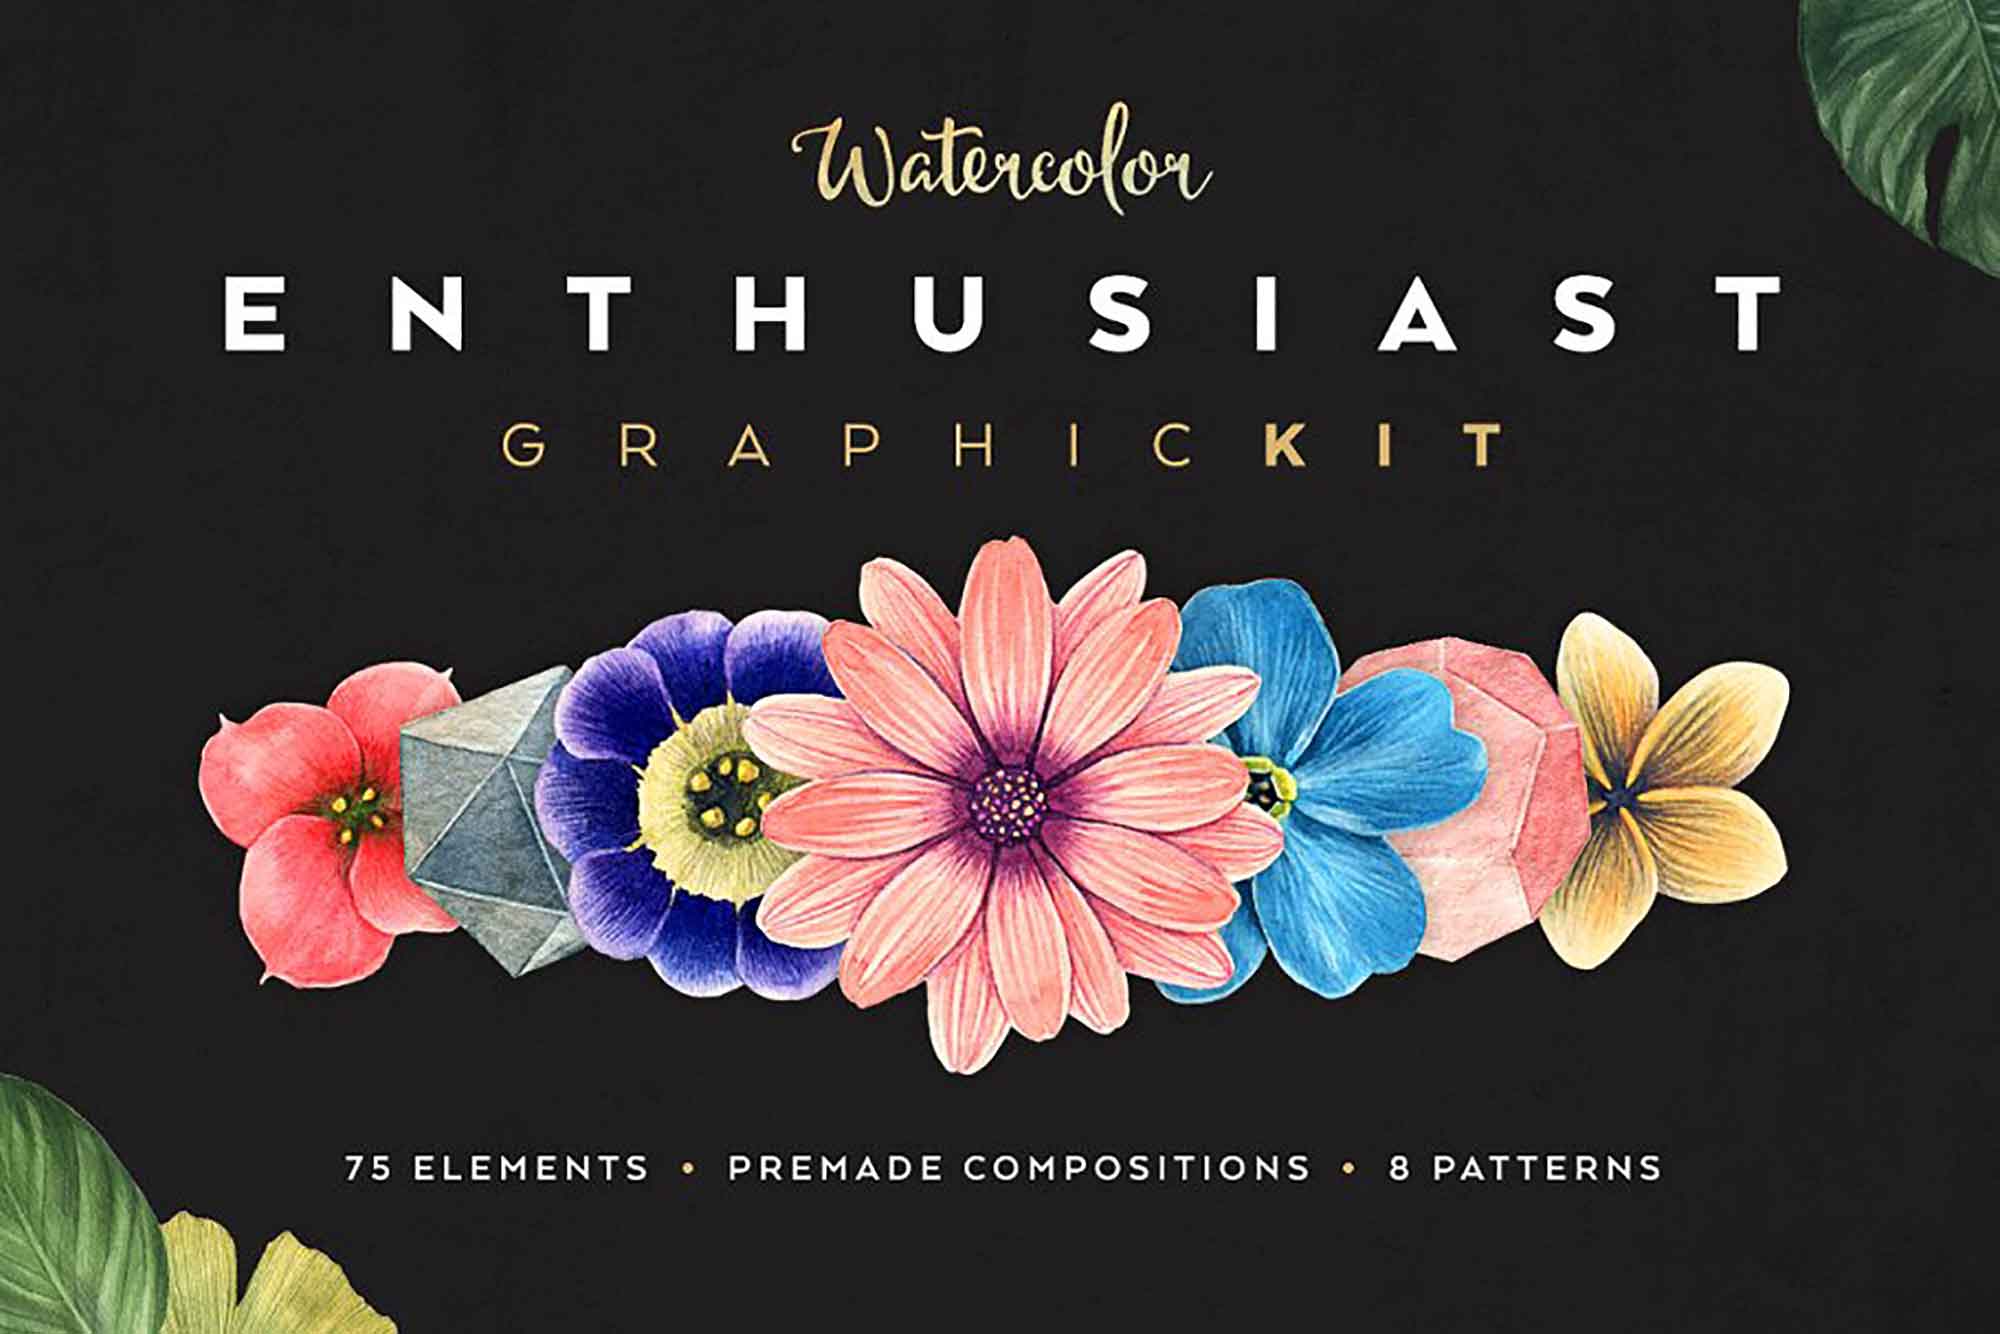 Watercolor Enthusiast Graphic